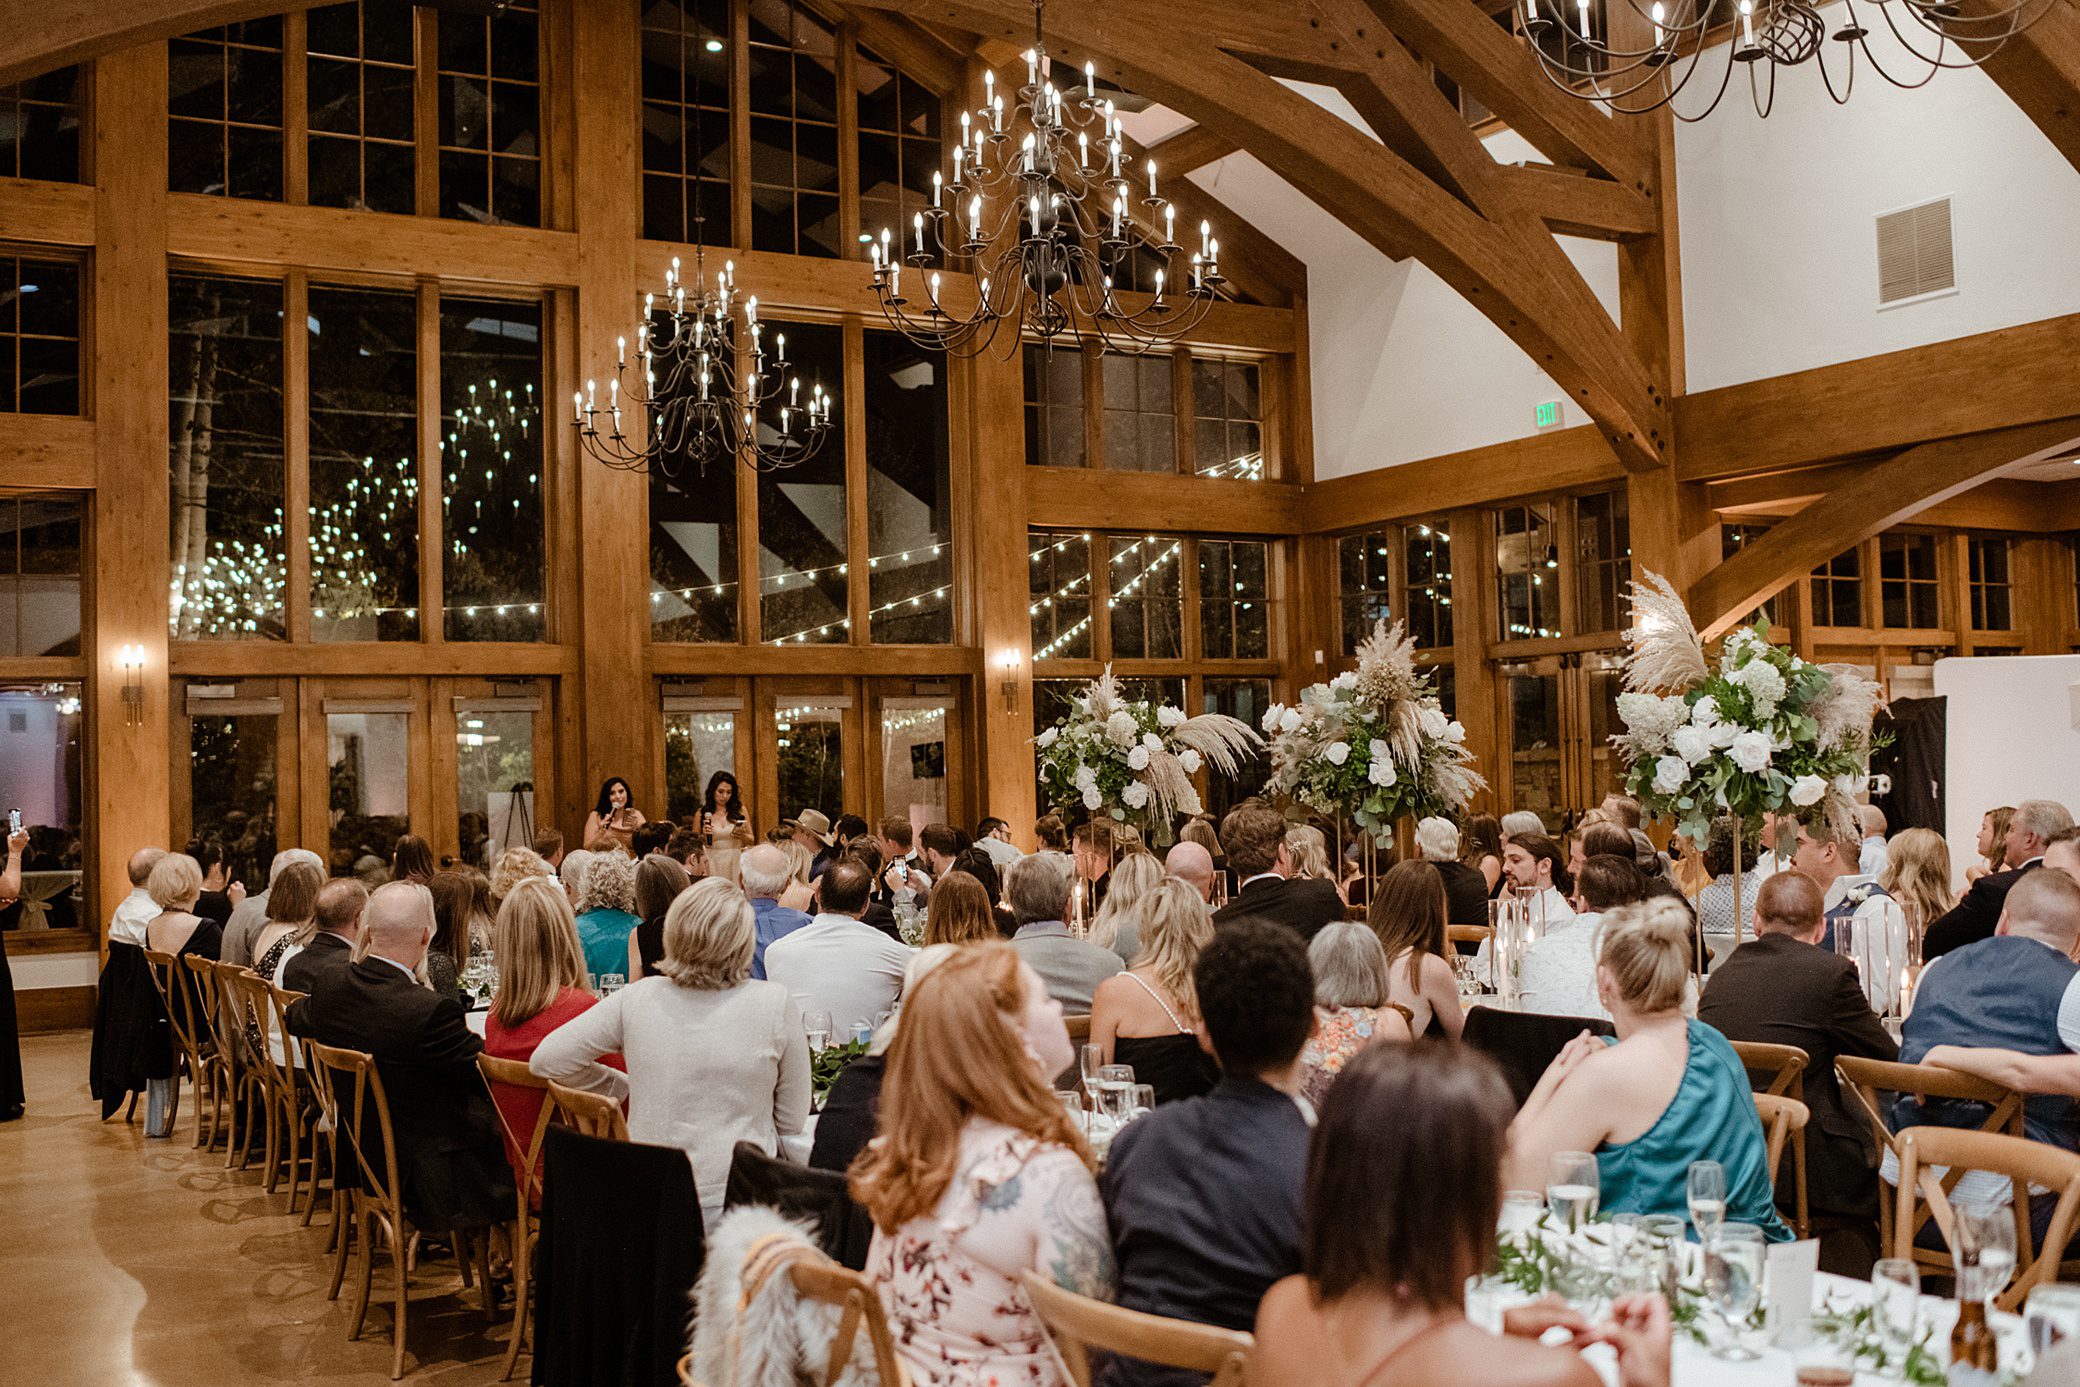 A dinner wedding reception at the Donovan Pavilion in Vail, Colorado